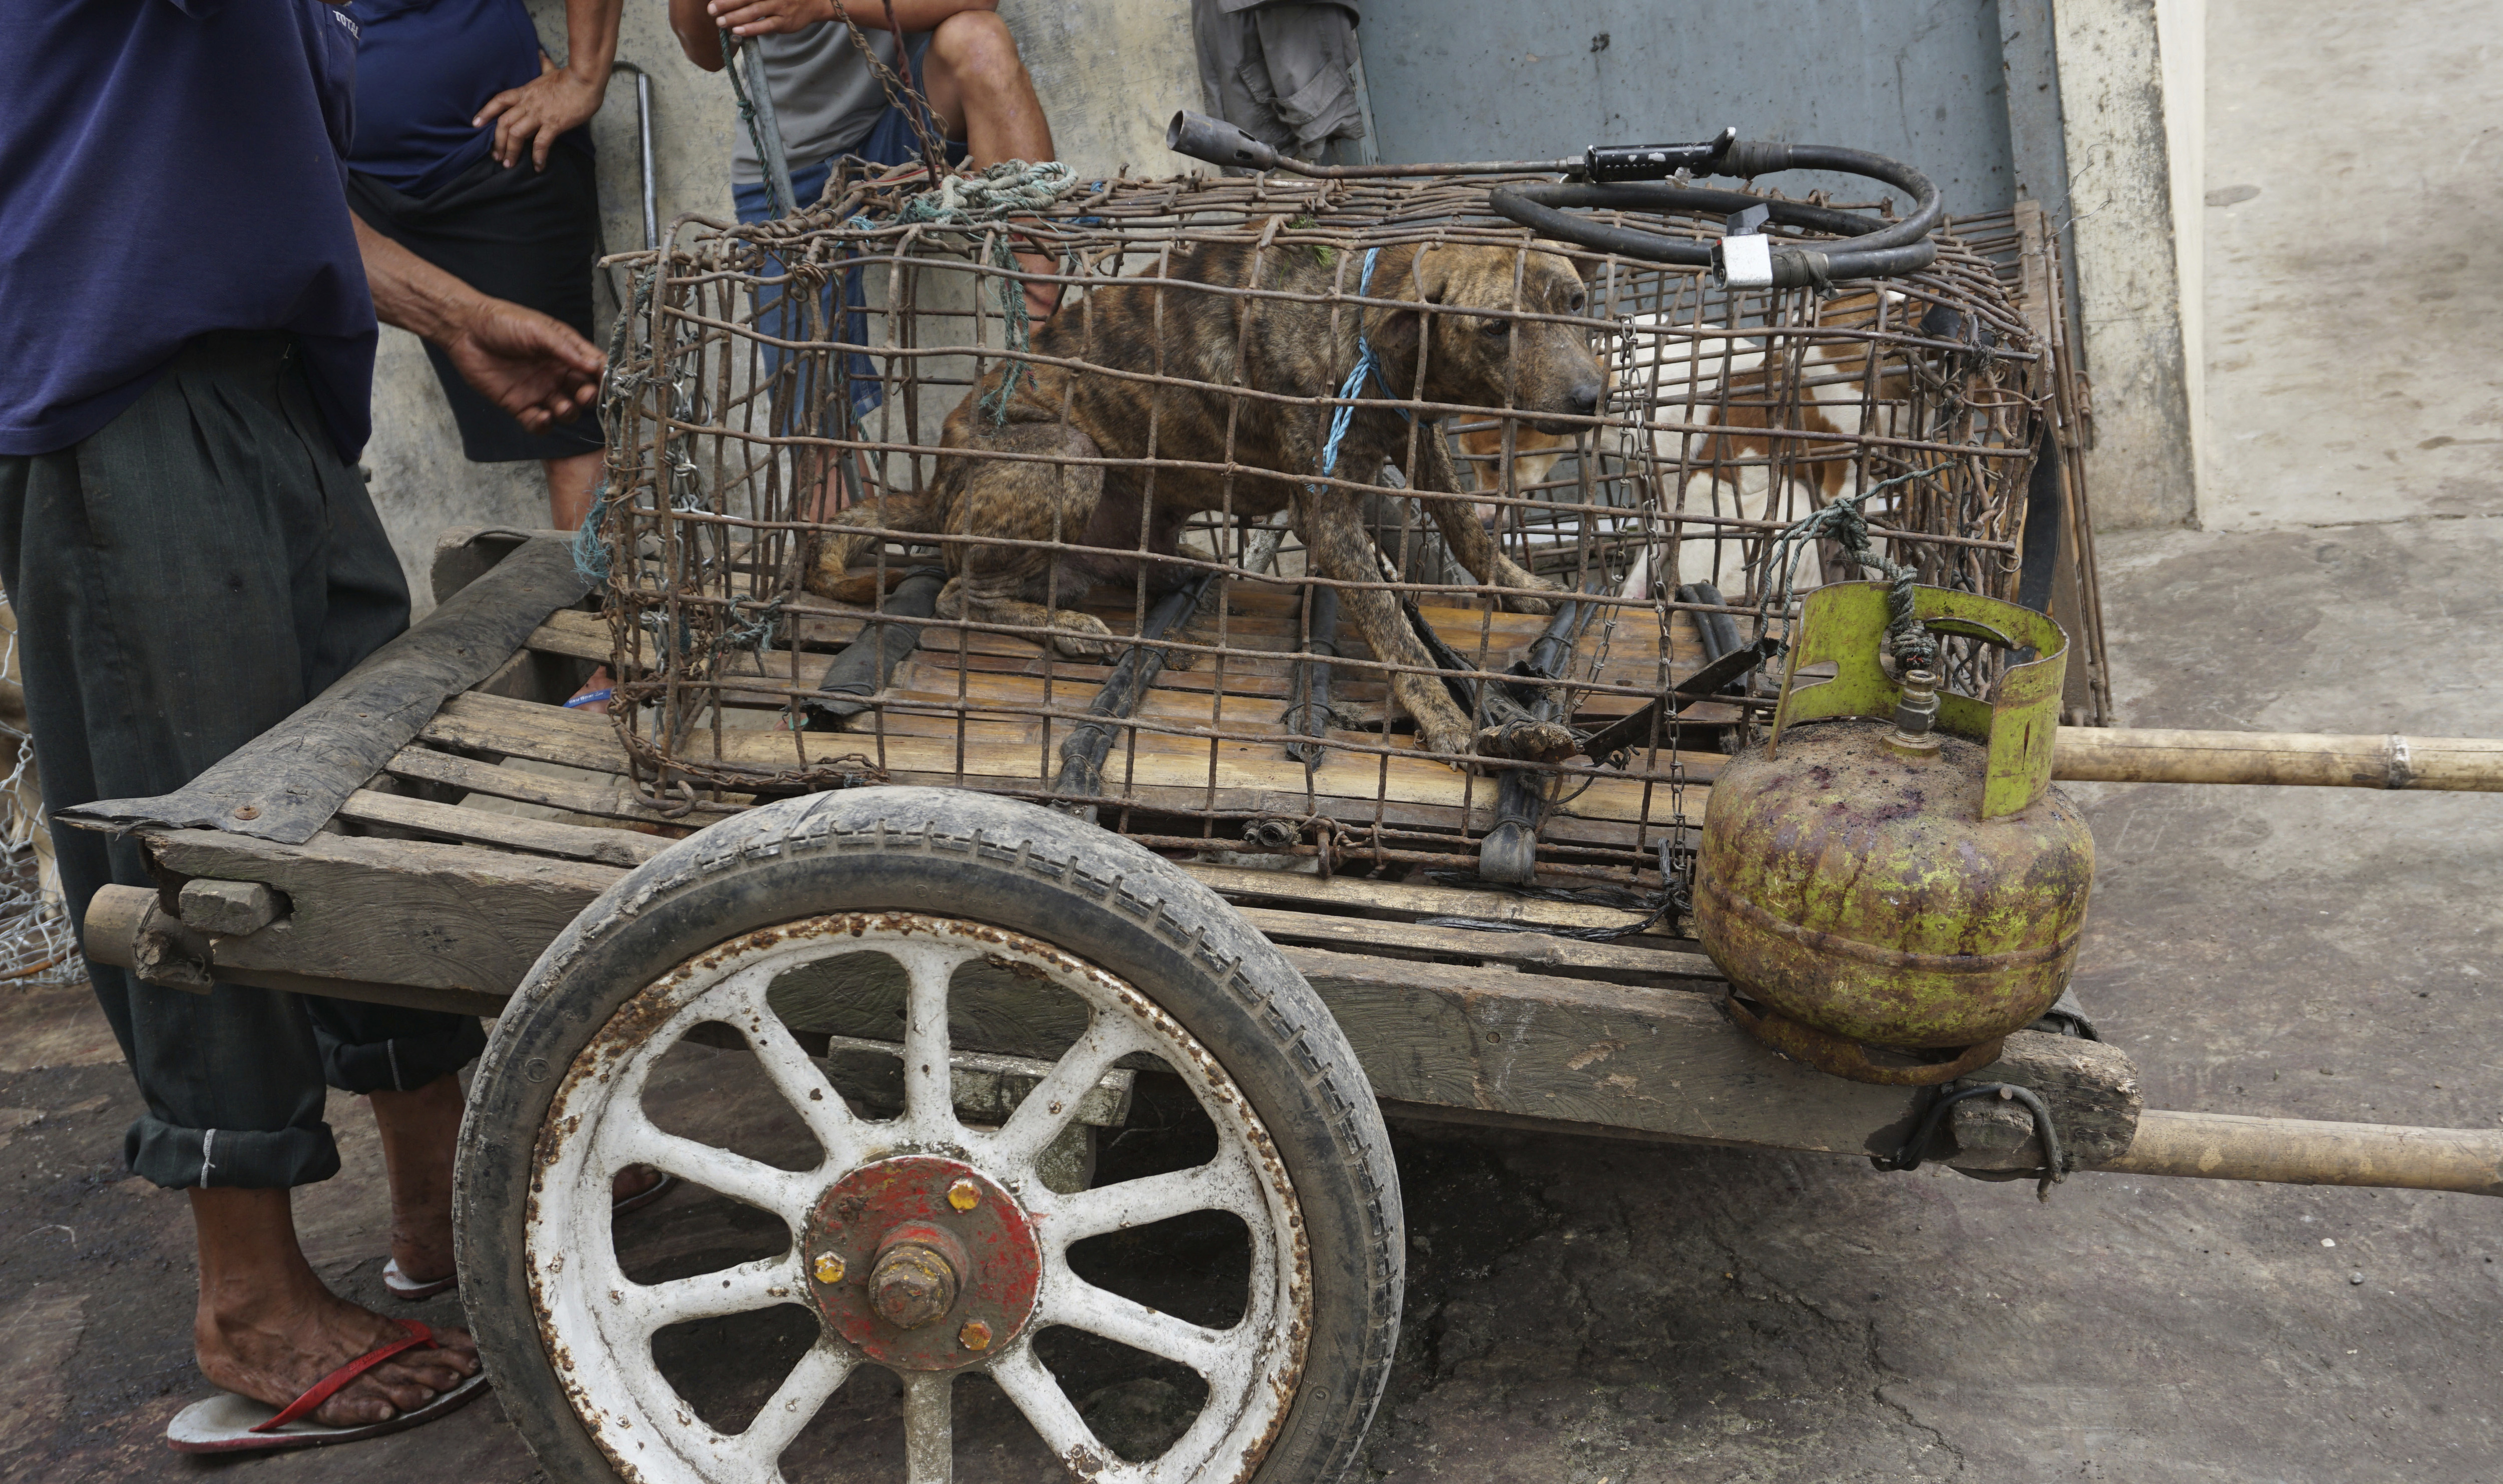 Dogs for sale in cages at a market in Langowan, North Sulawesi, Indonesia (Dog Meat Free Indonesia via AP)